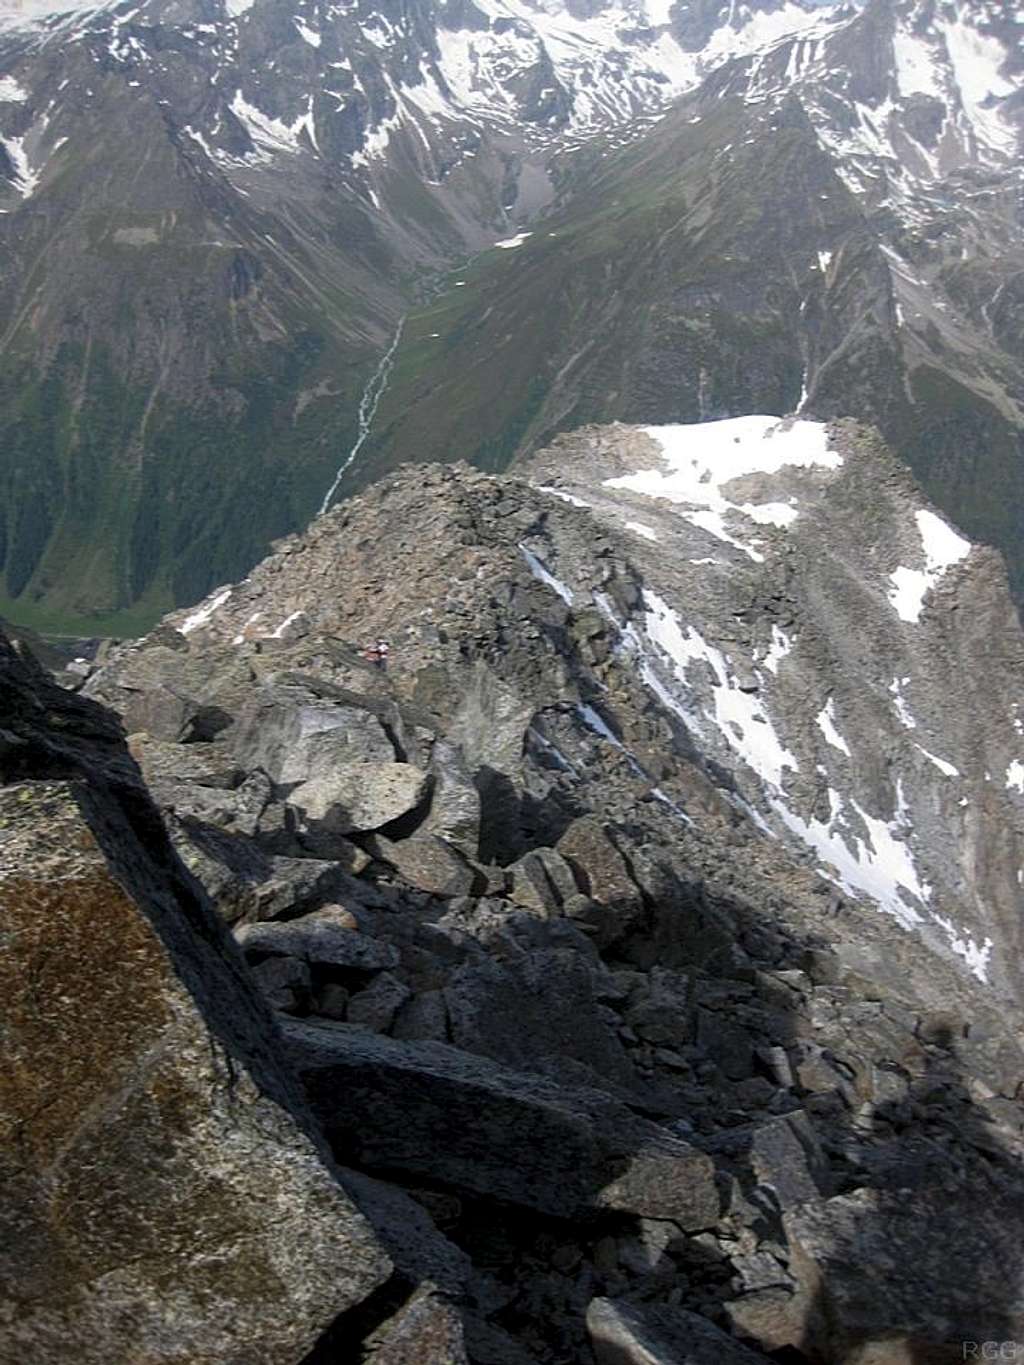 Looking down the Hohe Geige west ridge, about half way between Rüsselsheimer Hütte and the summit